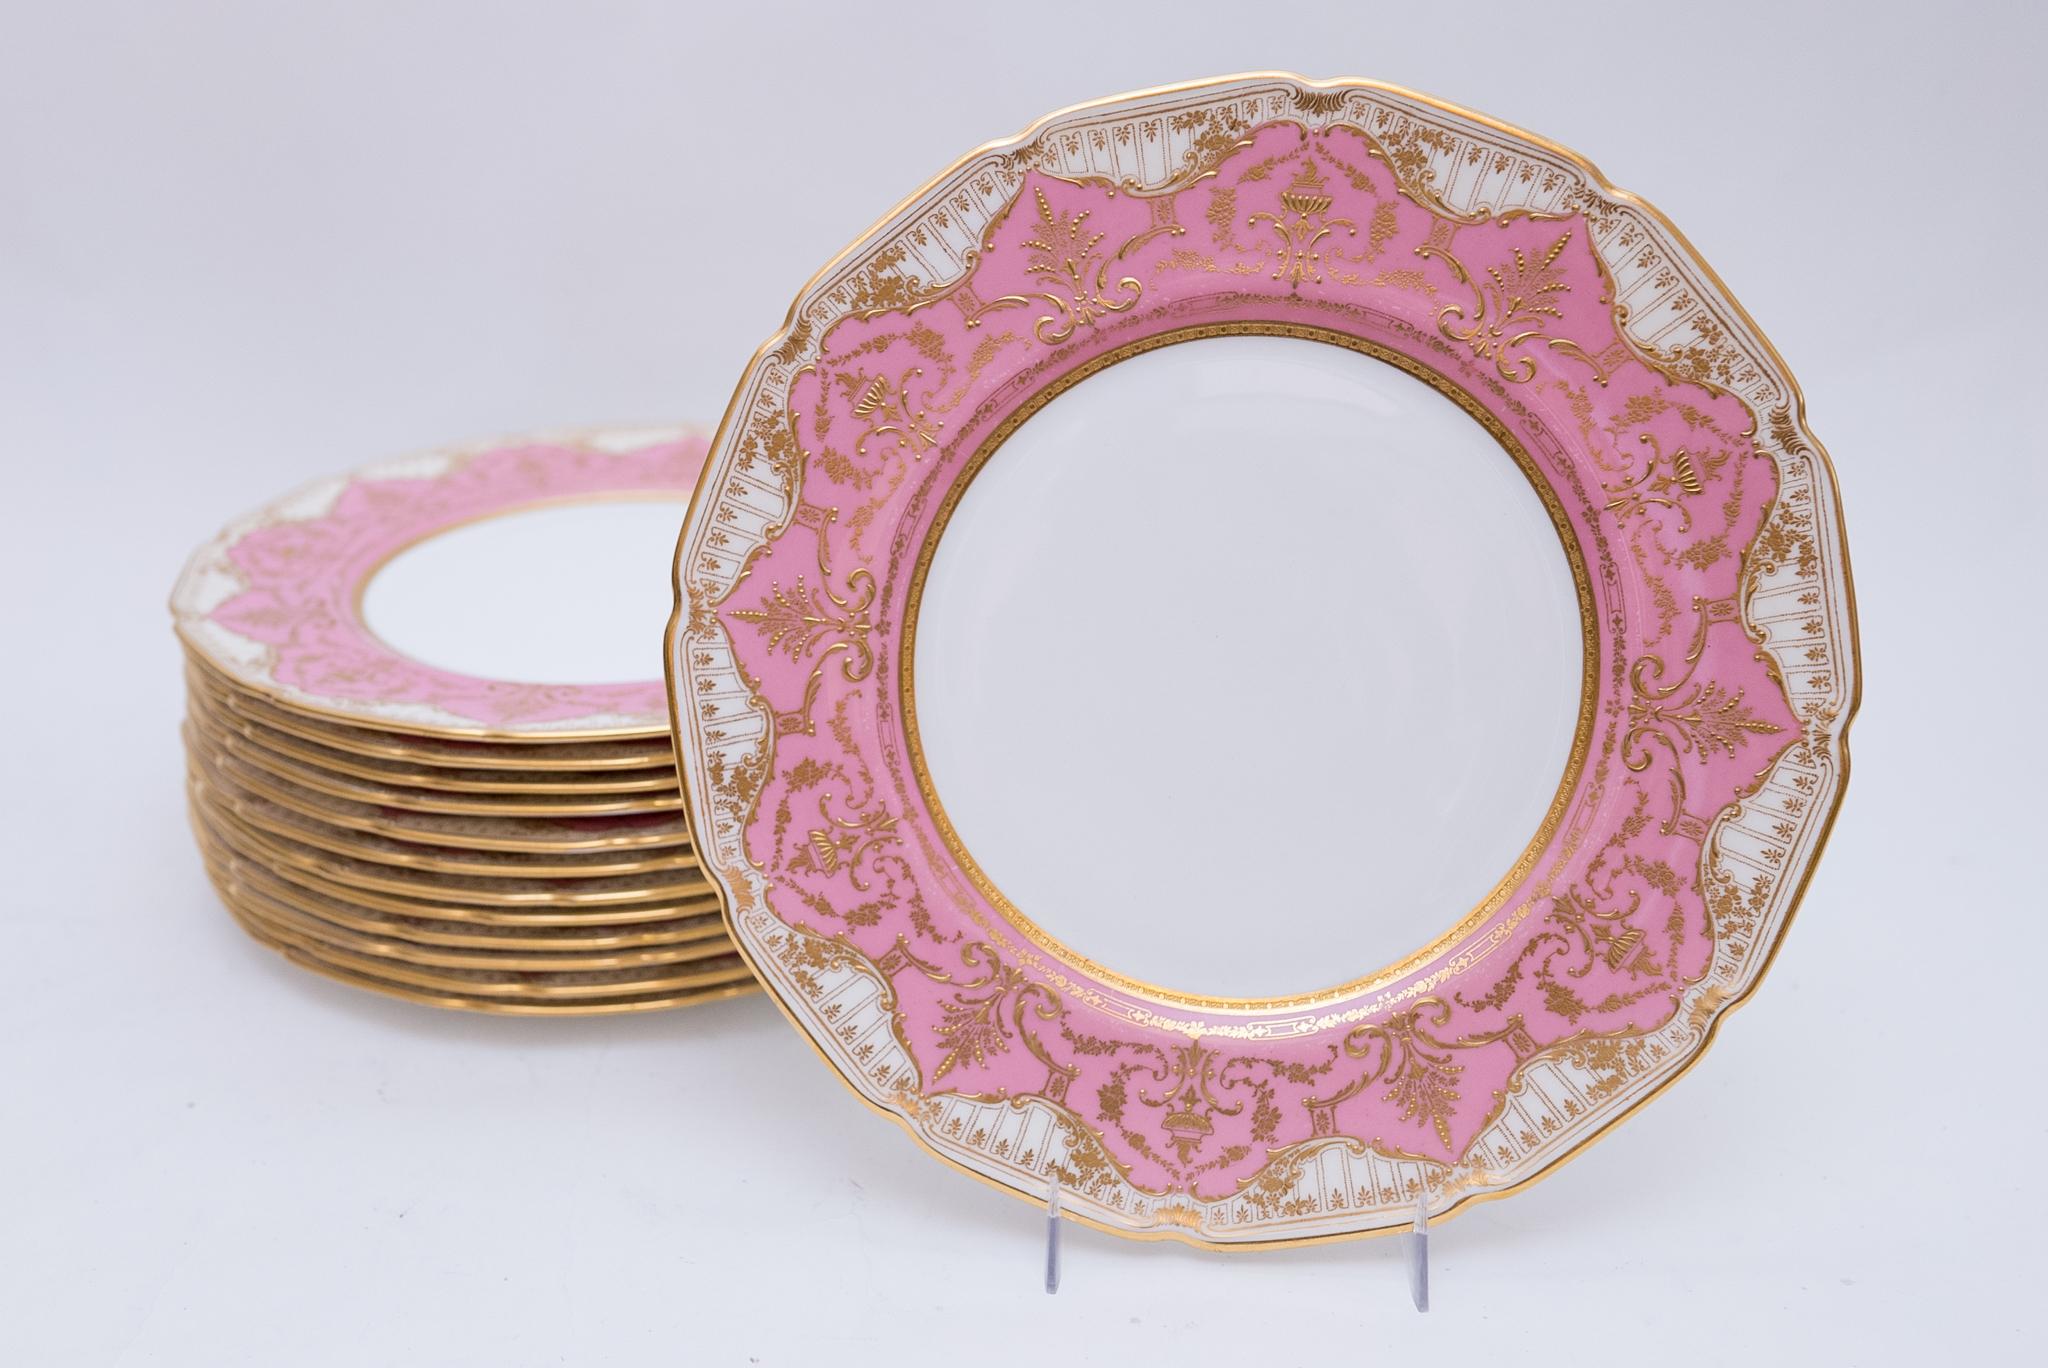 A pretty set of pink and raised gilt dinner plates, a set of 13 with one extra. This set features a collar of pink and light cream swirl pattern with finely detailed gilding in an urn and floral design. In wonderful antique condition and ready to